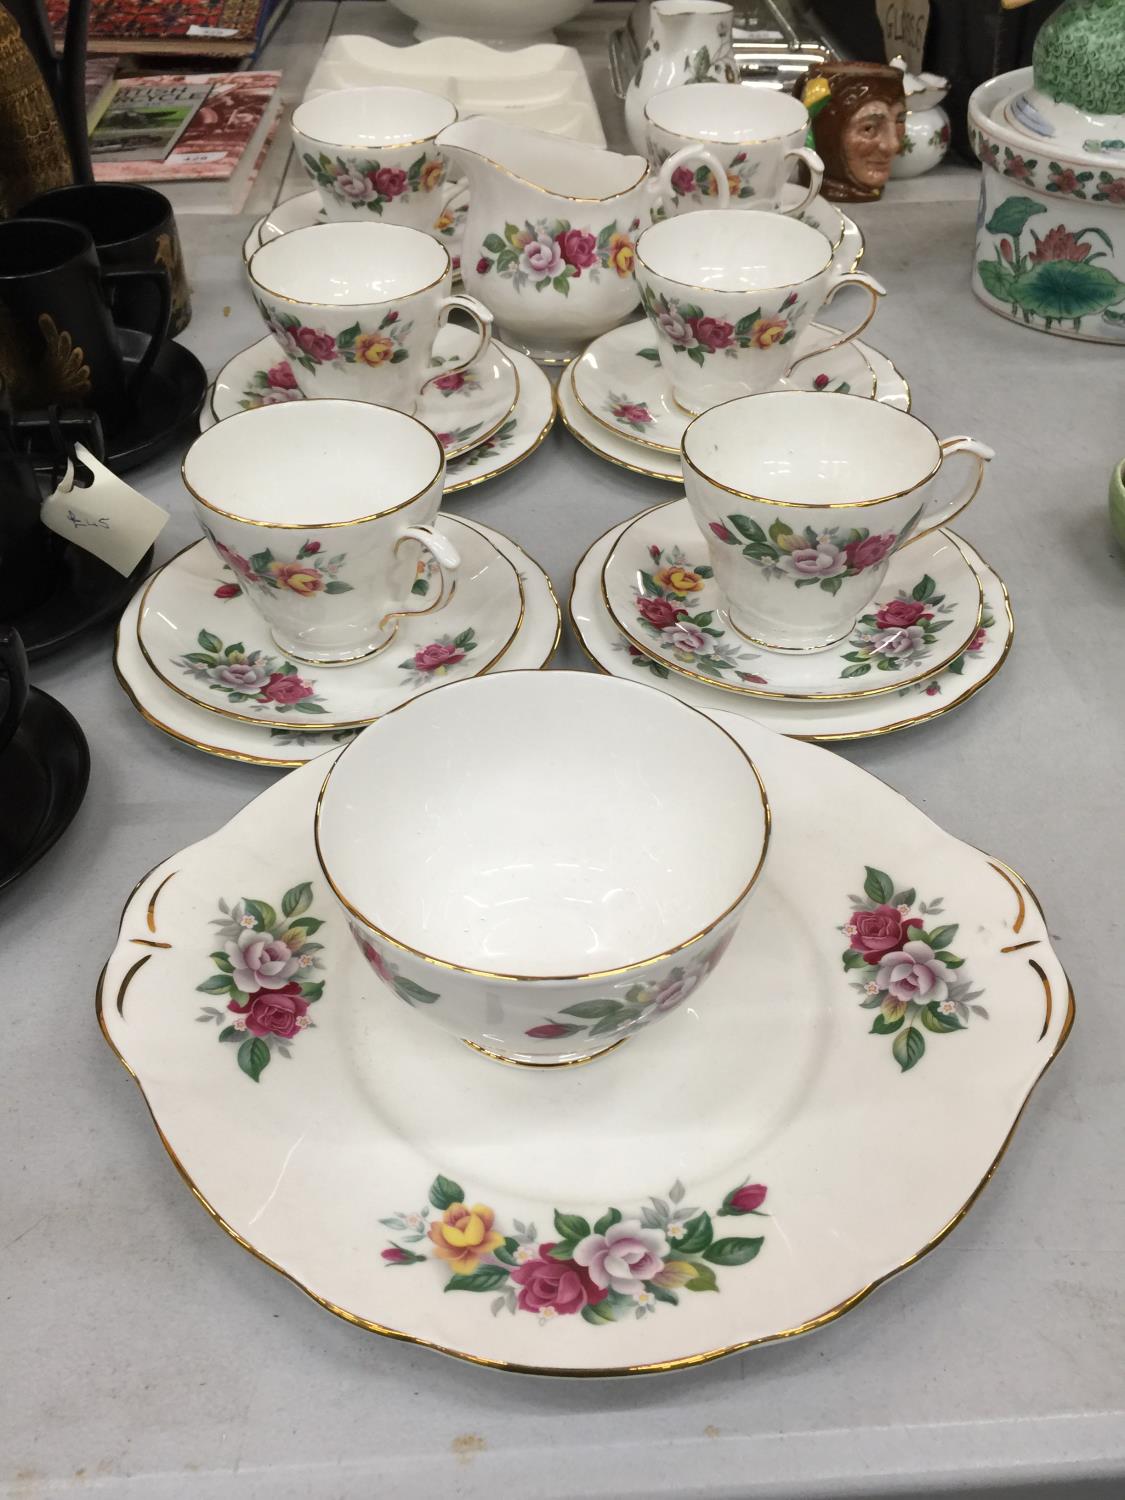 A DUCHESS 'VICTORIA' CHINA TEA SET TO INCLUDE CAKE PLATE, CREAM JUG, SUGAR BOWL, CUPS, SAUCERS AND